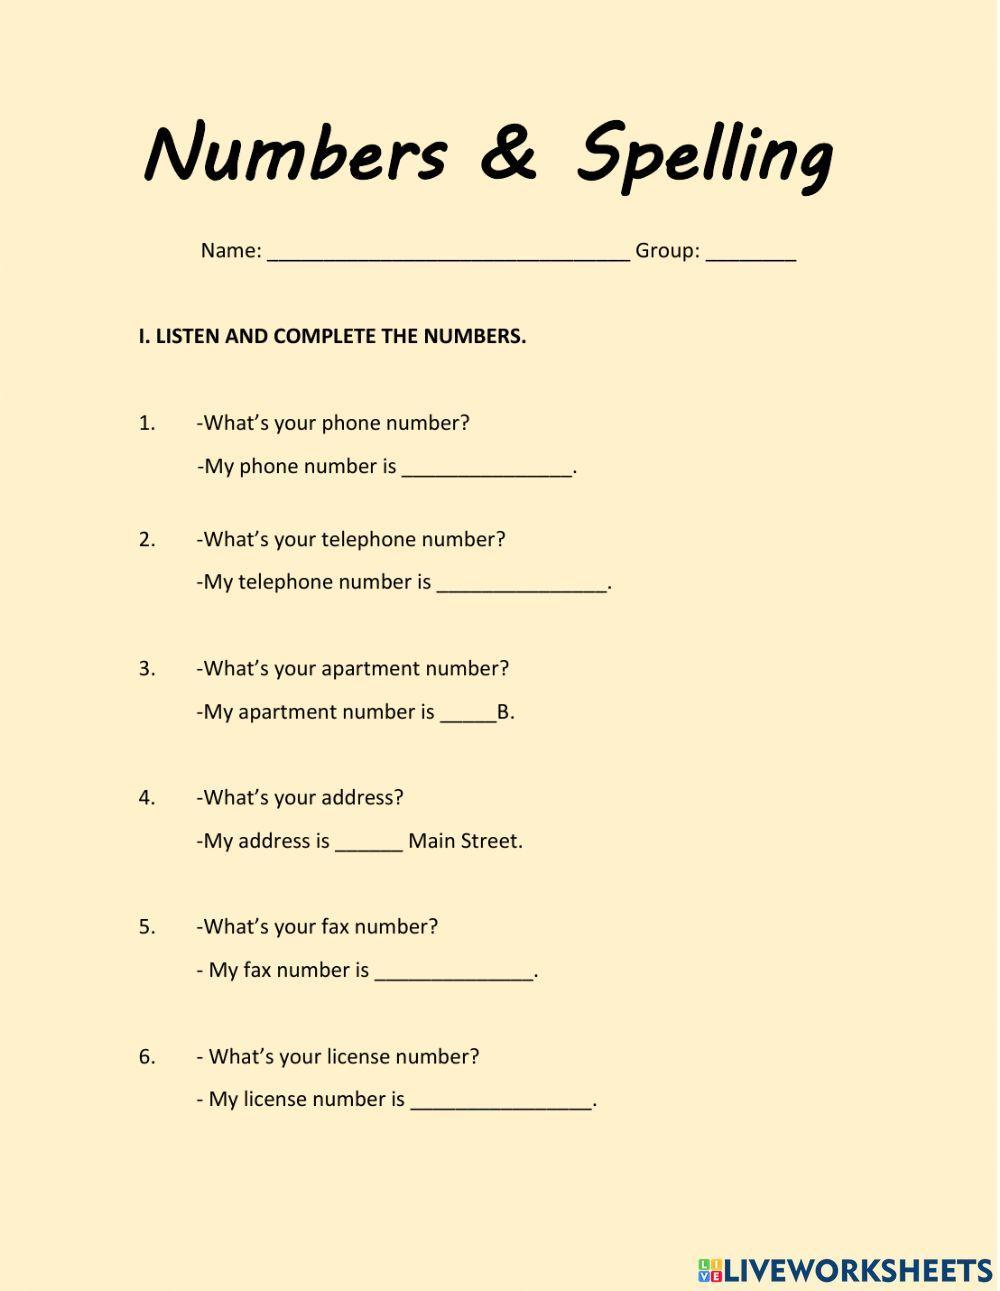 Numbers and Spelling